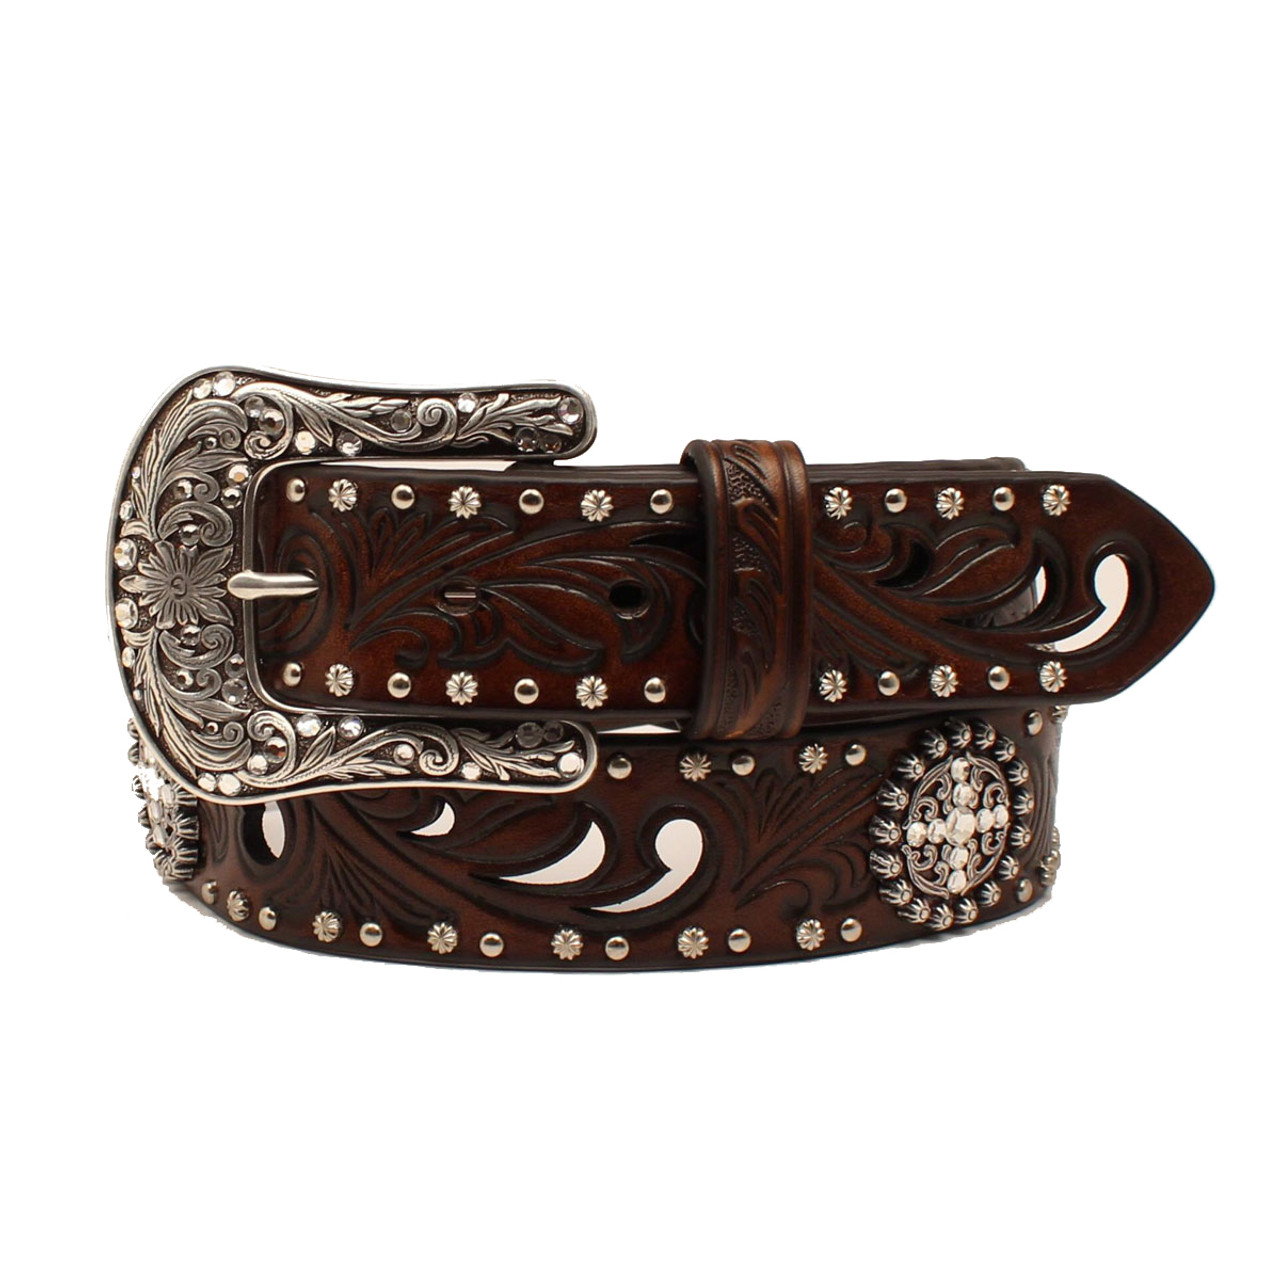 Lds Embossed Pattern Belt w Circle Cross RS Conchos - A1518602 - Stages ...